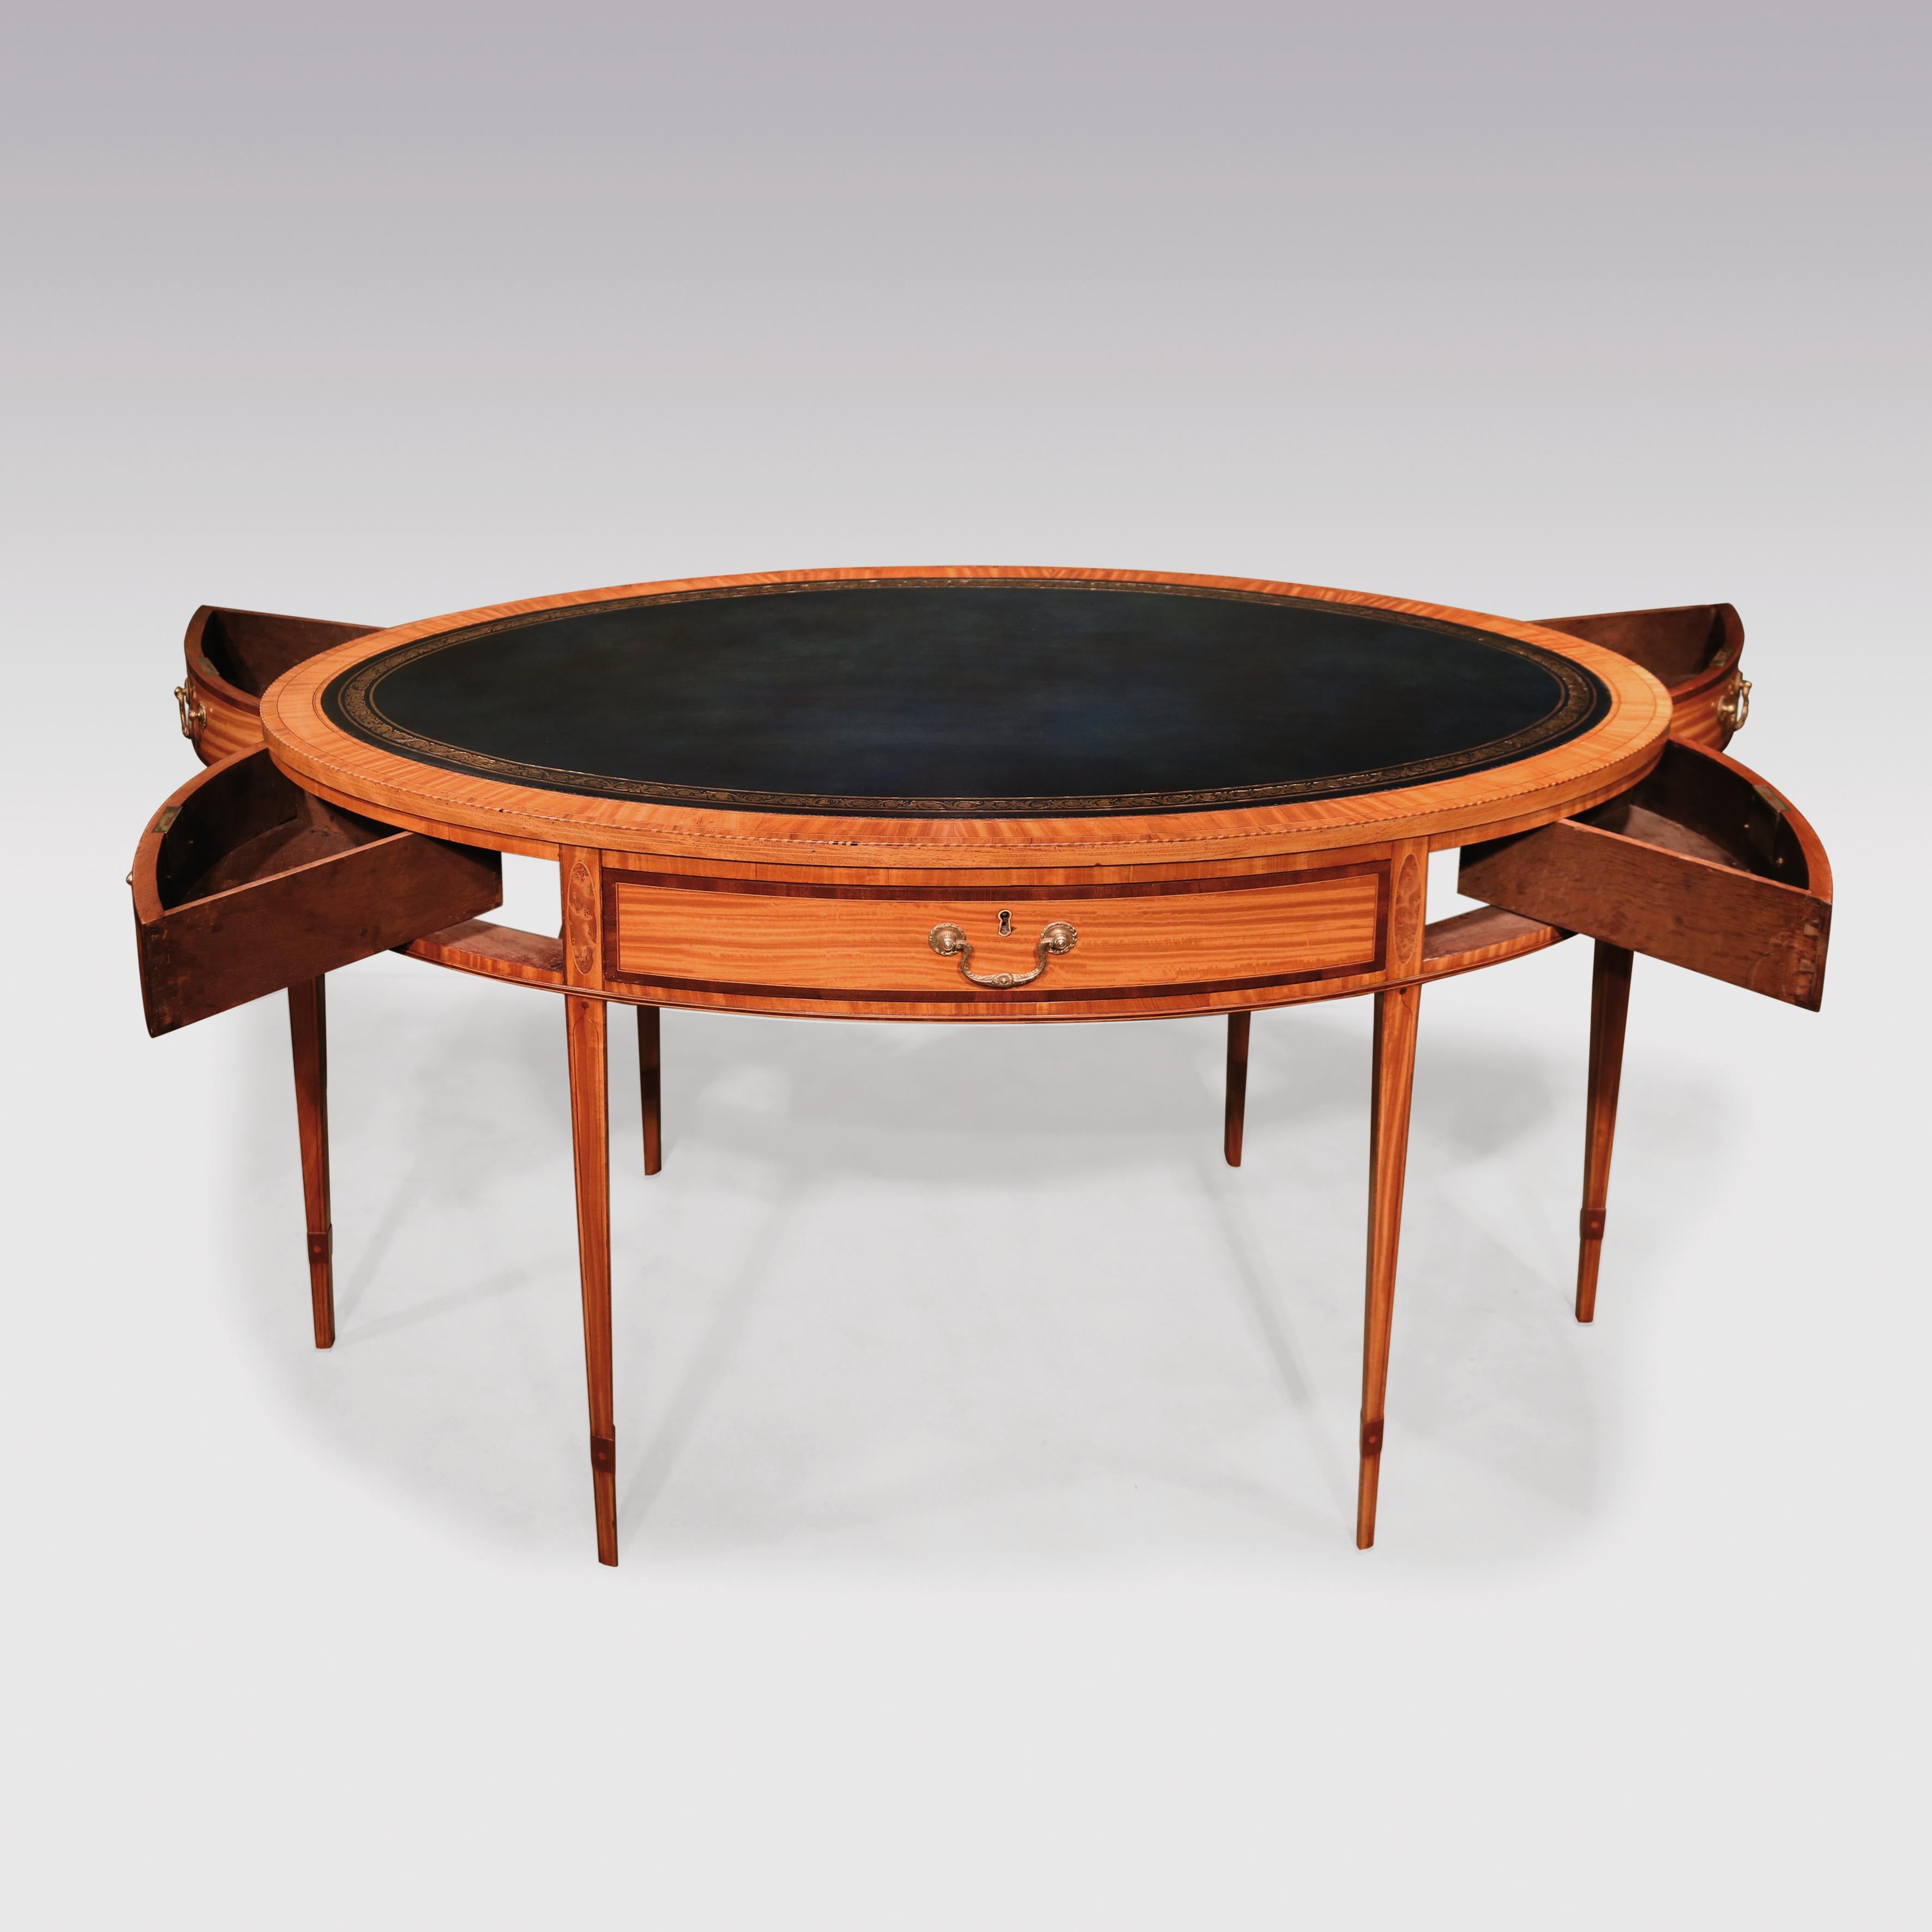 A fine mid-19th century satinwood oval writing table in the Sheraton manner, boxwood and ebony lined throughout, having tulipwood and satinwood cross-banded gilt tooled blue leather top above 6 opening purple heart cross-banded drawers divided by